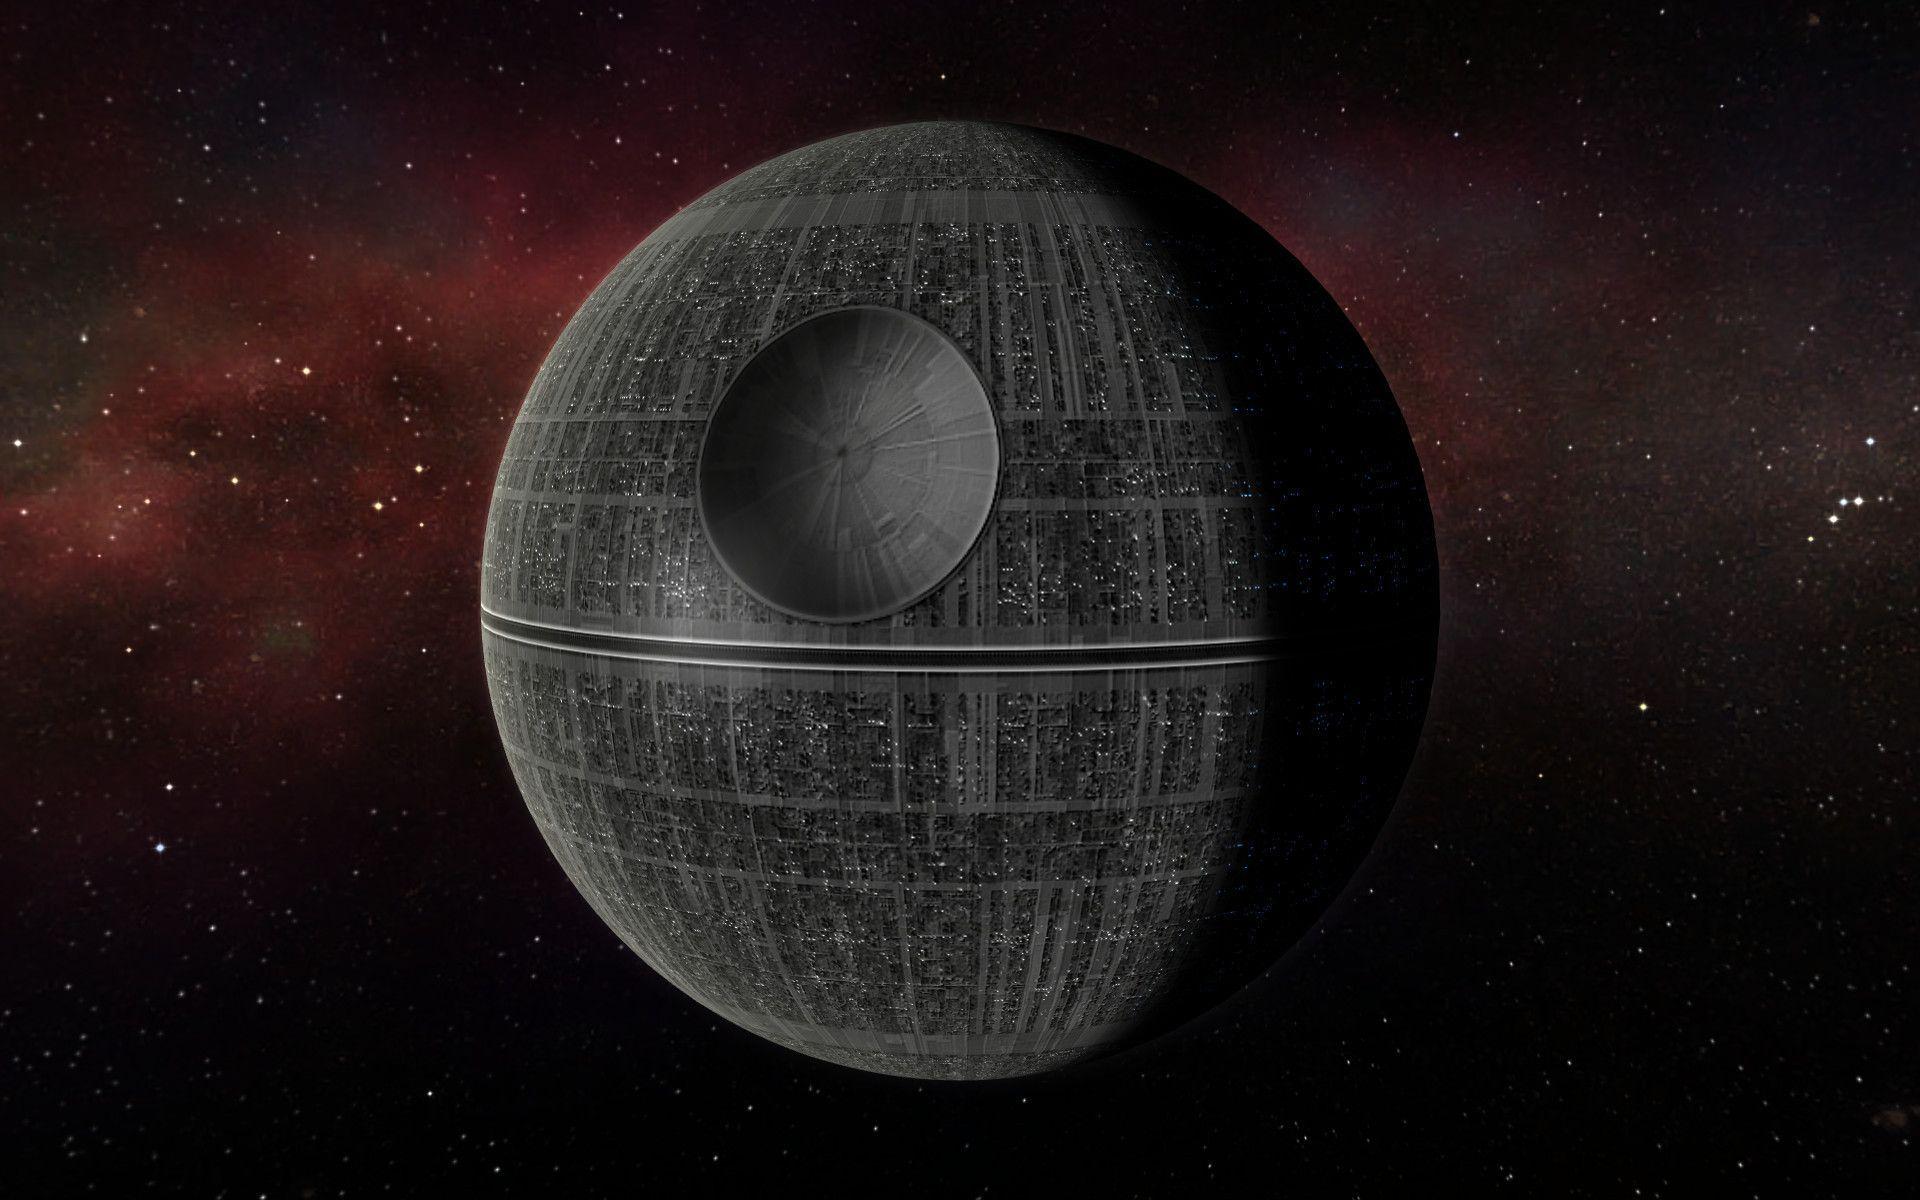 White House says no to Death Star&;t Mess With Taxes